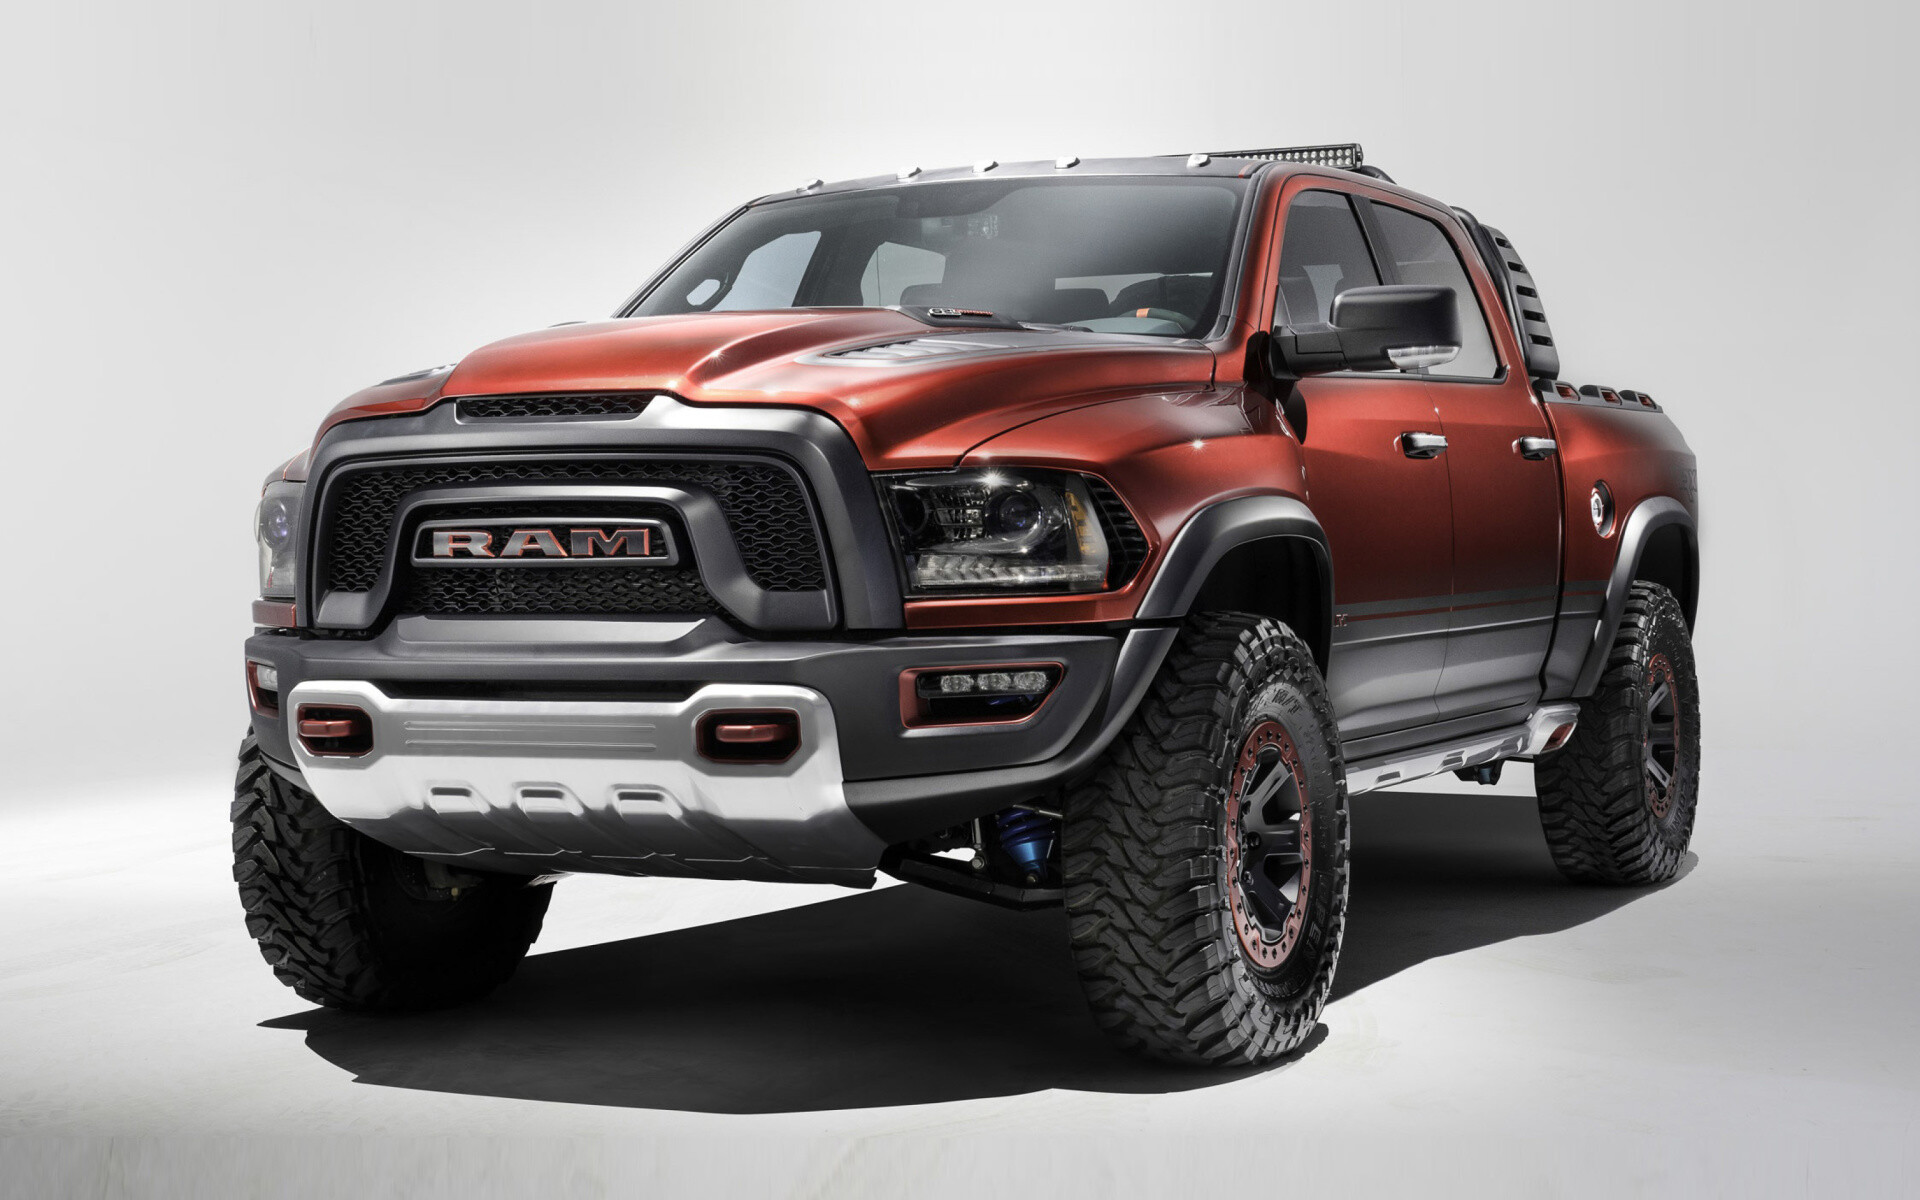 Ram Pickup: Dodge introduced the 4500 and 5500 Chassis Cab models for 2008, 1500 model. 1920x1200 HD Wallpaper.